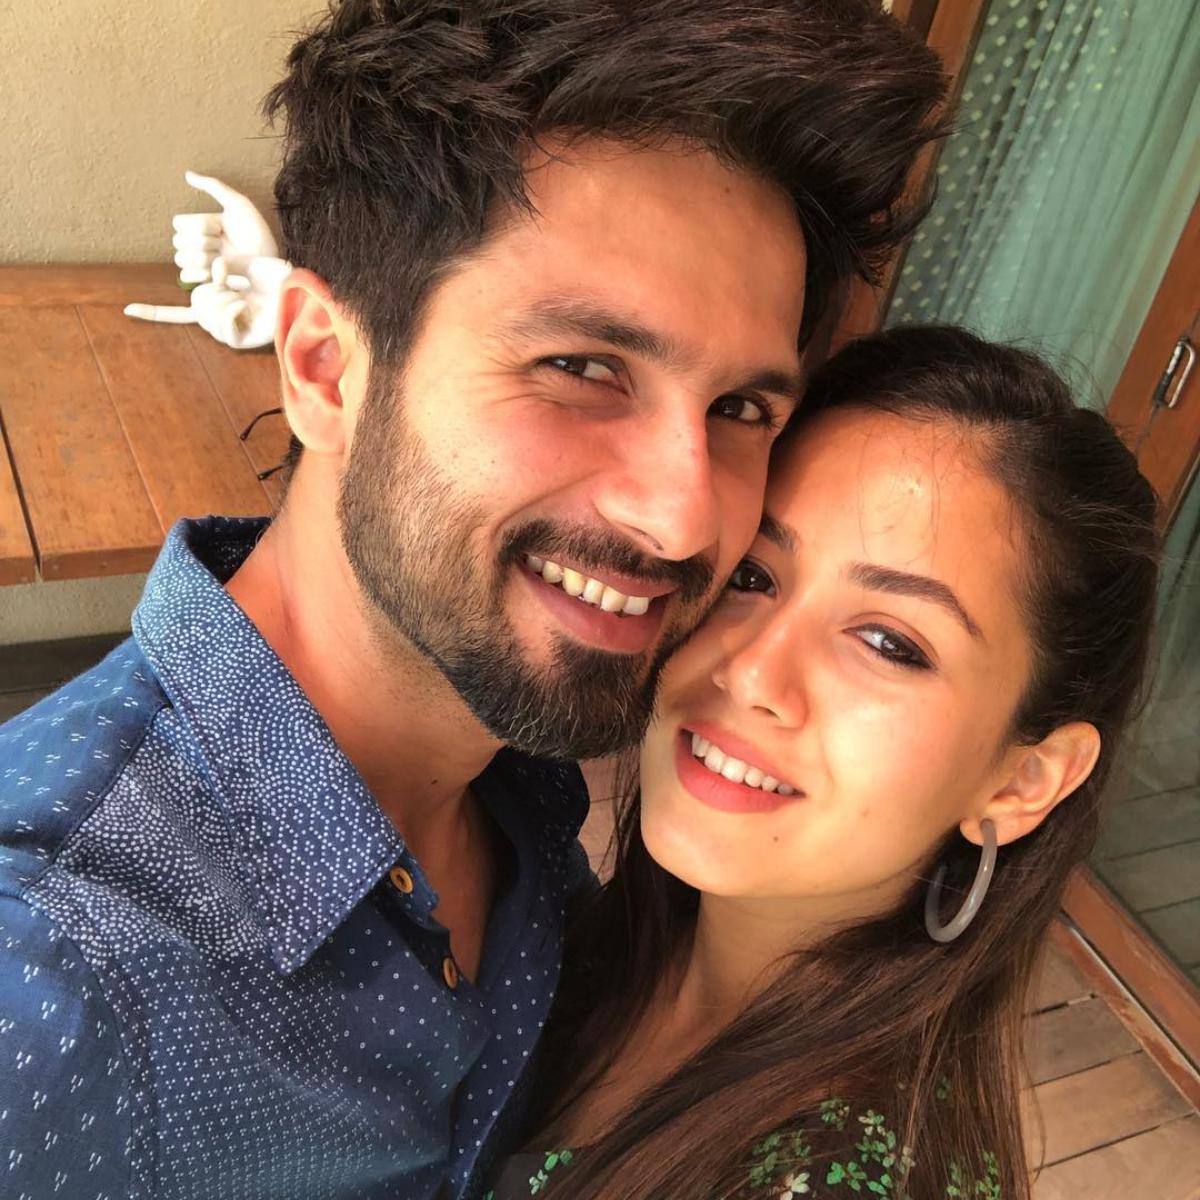 Will Shahid Kapoor also become aatmanirbhar now as Mira Rajput "Can't Deal No More" With Shahid Kapoor's sappy mode in Lockdown 4.0